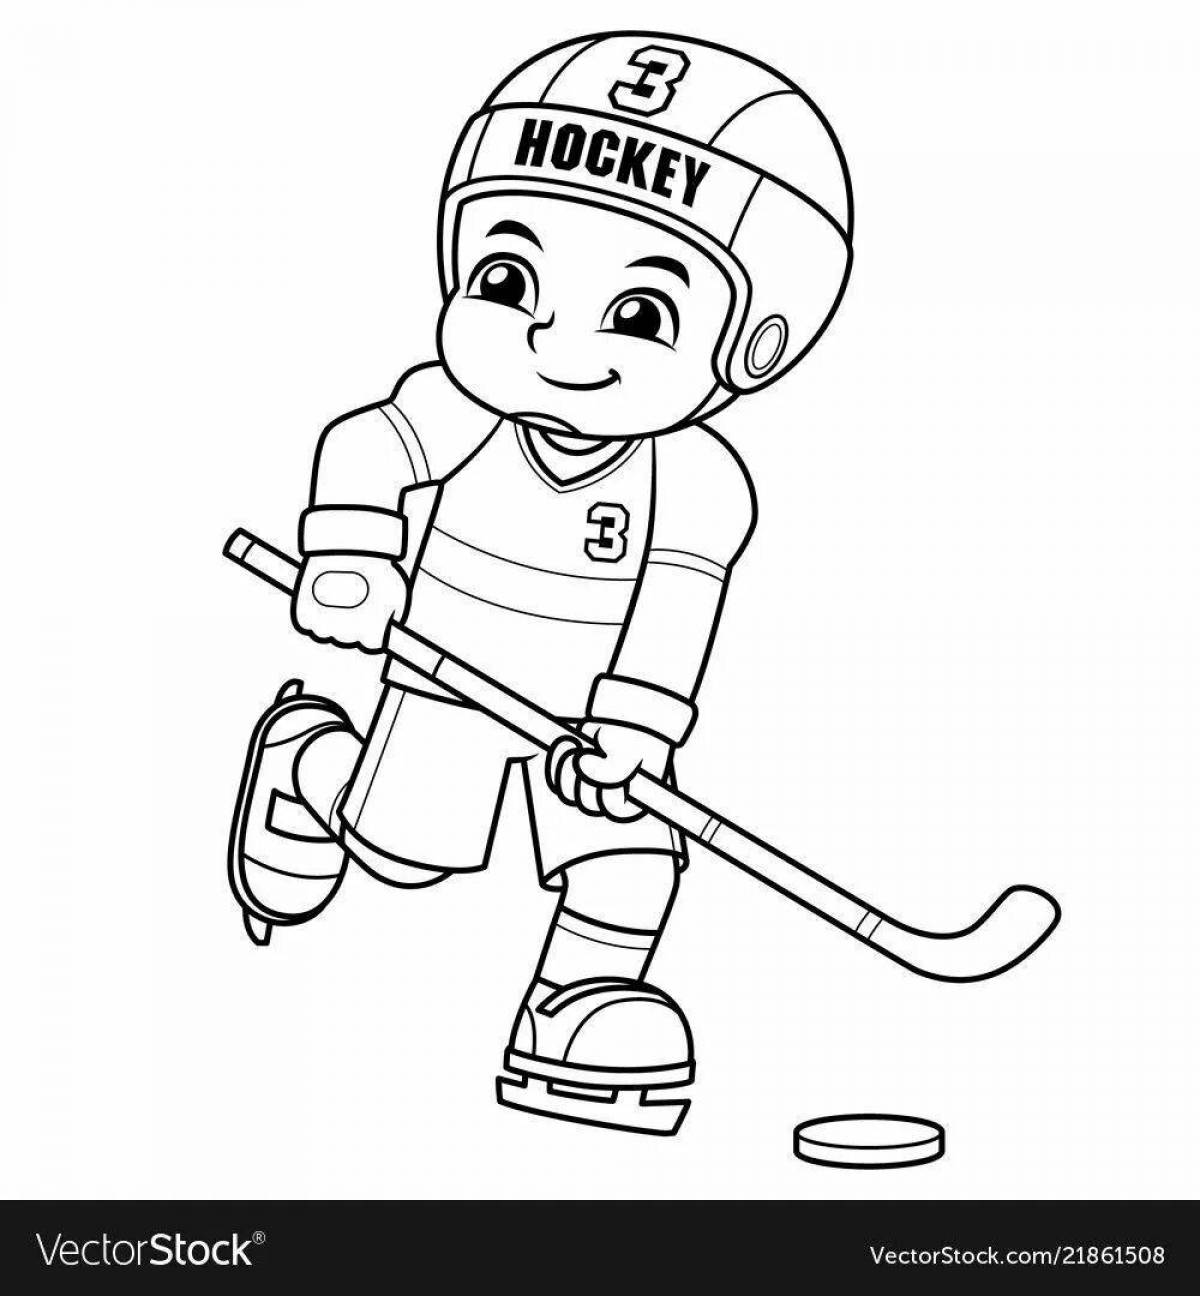 Glittering winter sports coloring page for preschoolers